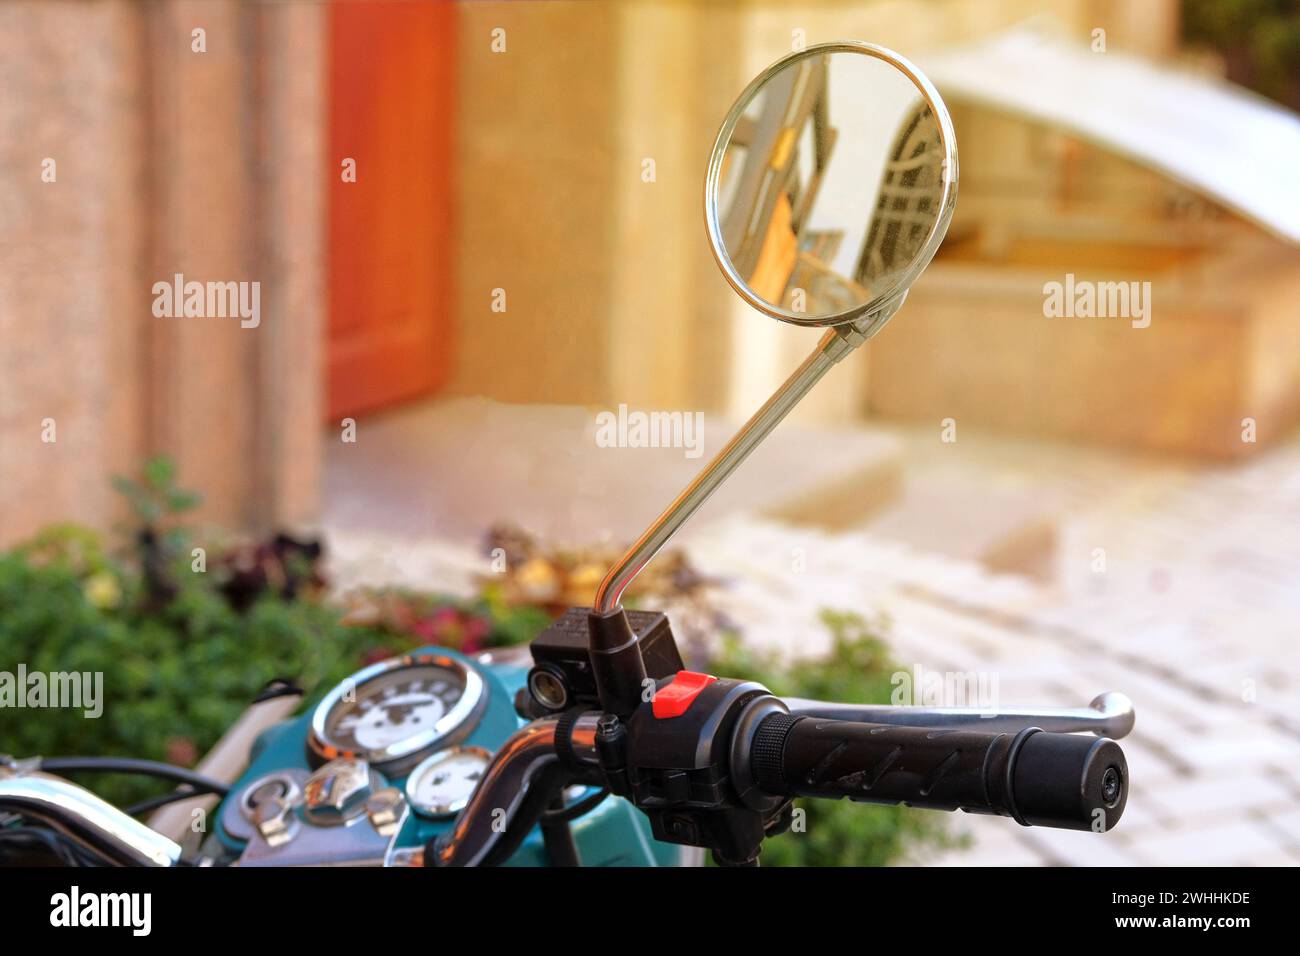 Moped mirror. City on sunny day. Ride for relaxation. Active life concept. Stock Photo